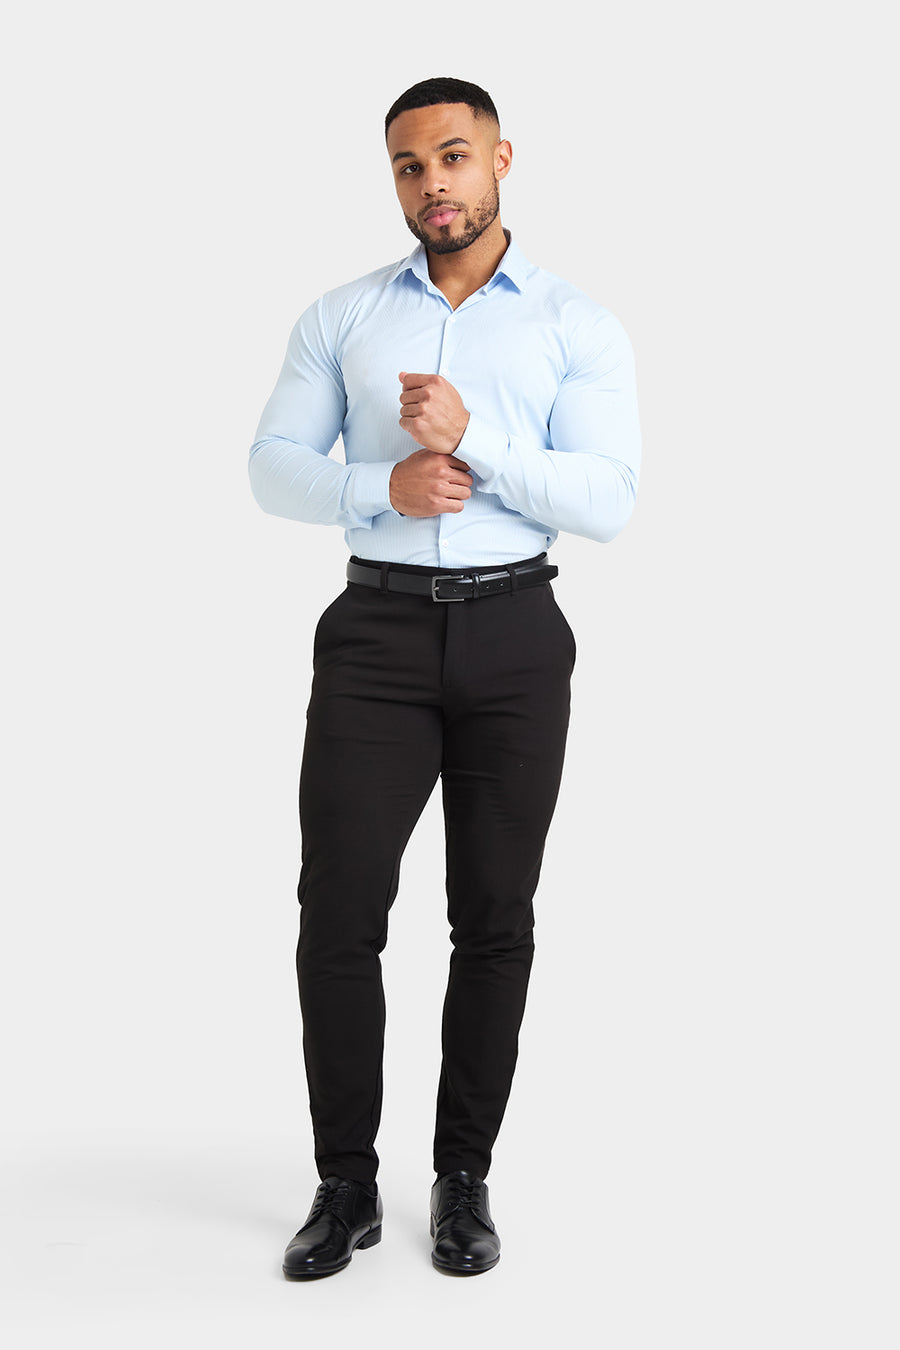 Performance Business Shirt in Blue Mid Stripe - TAILORED ATHLETE - USA